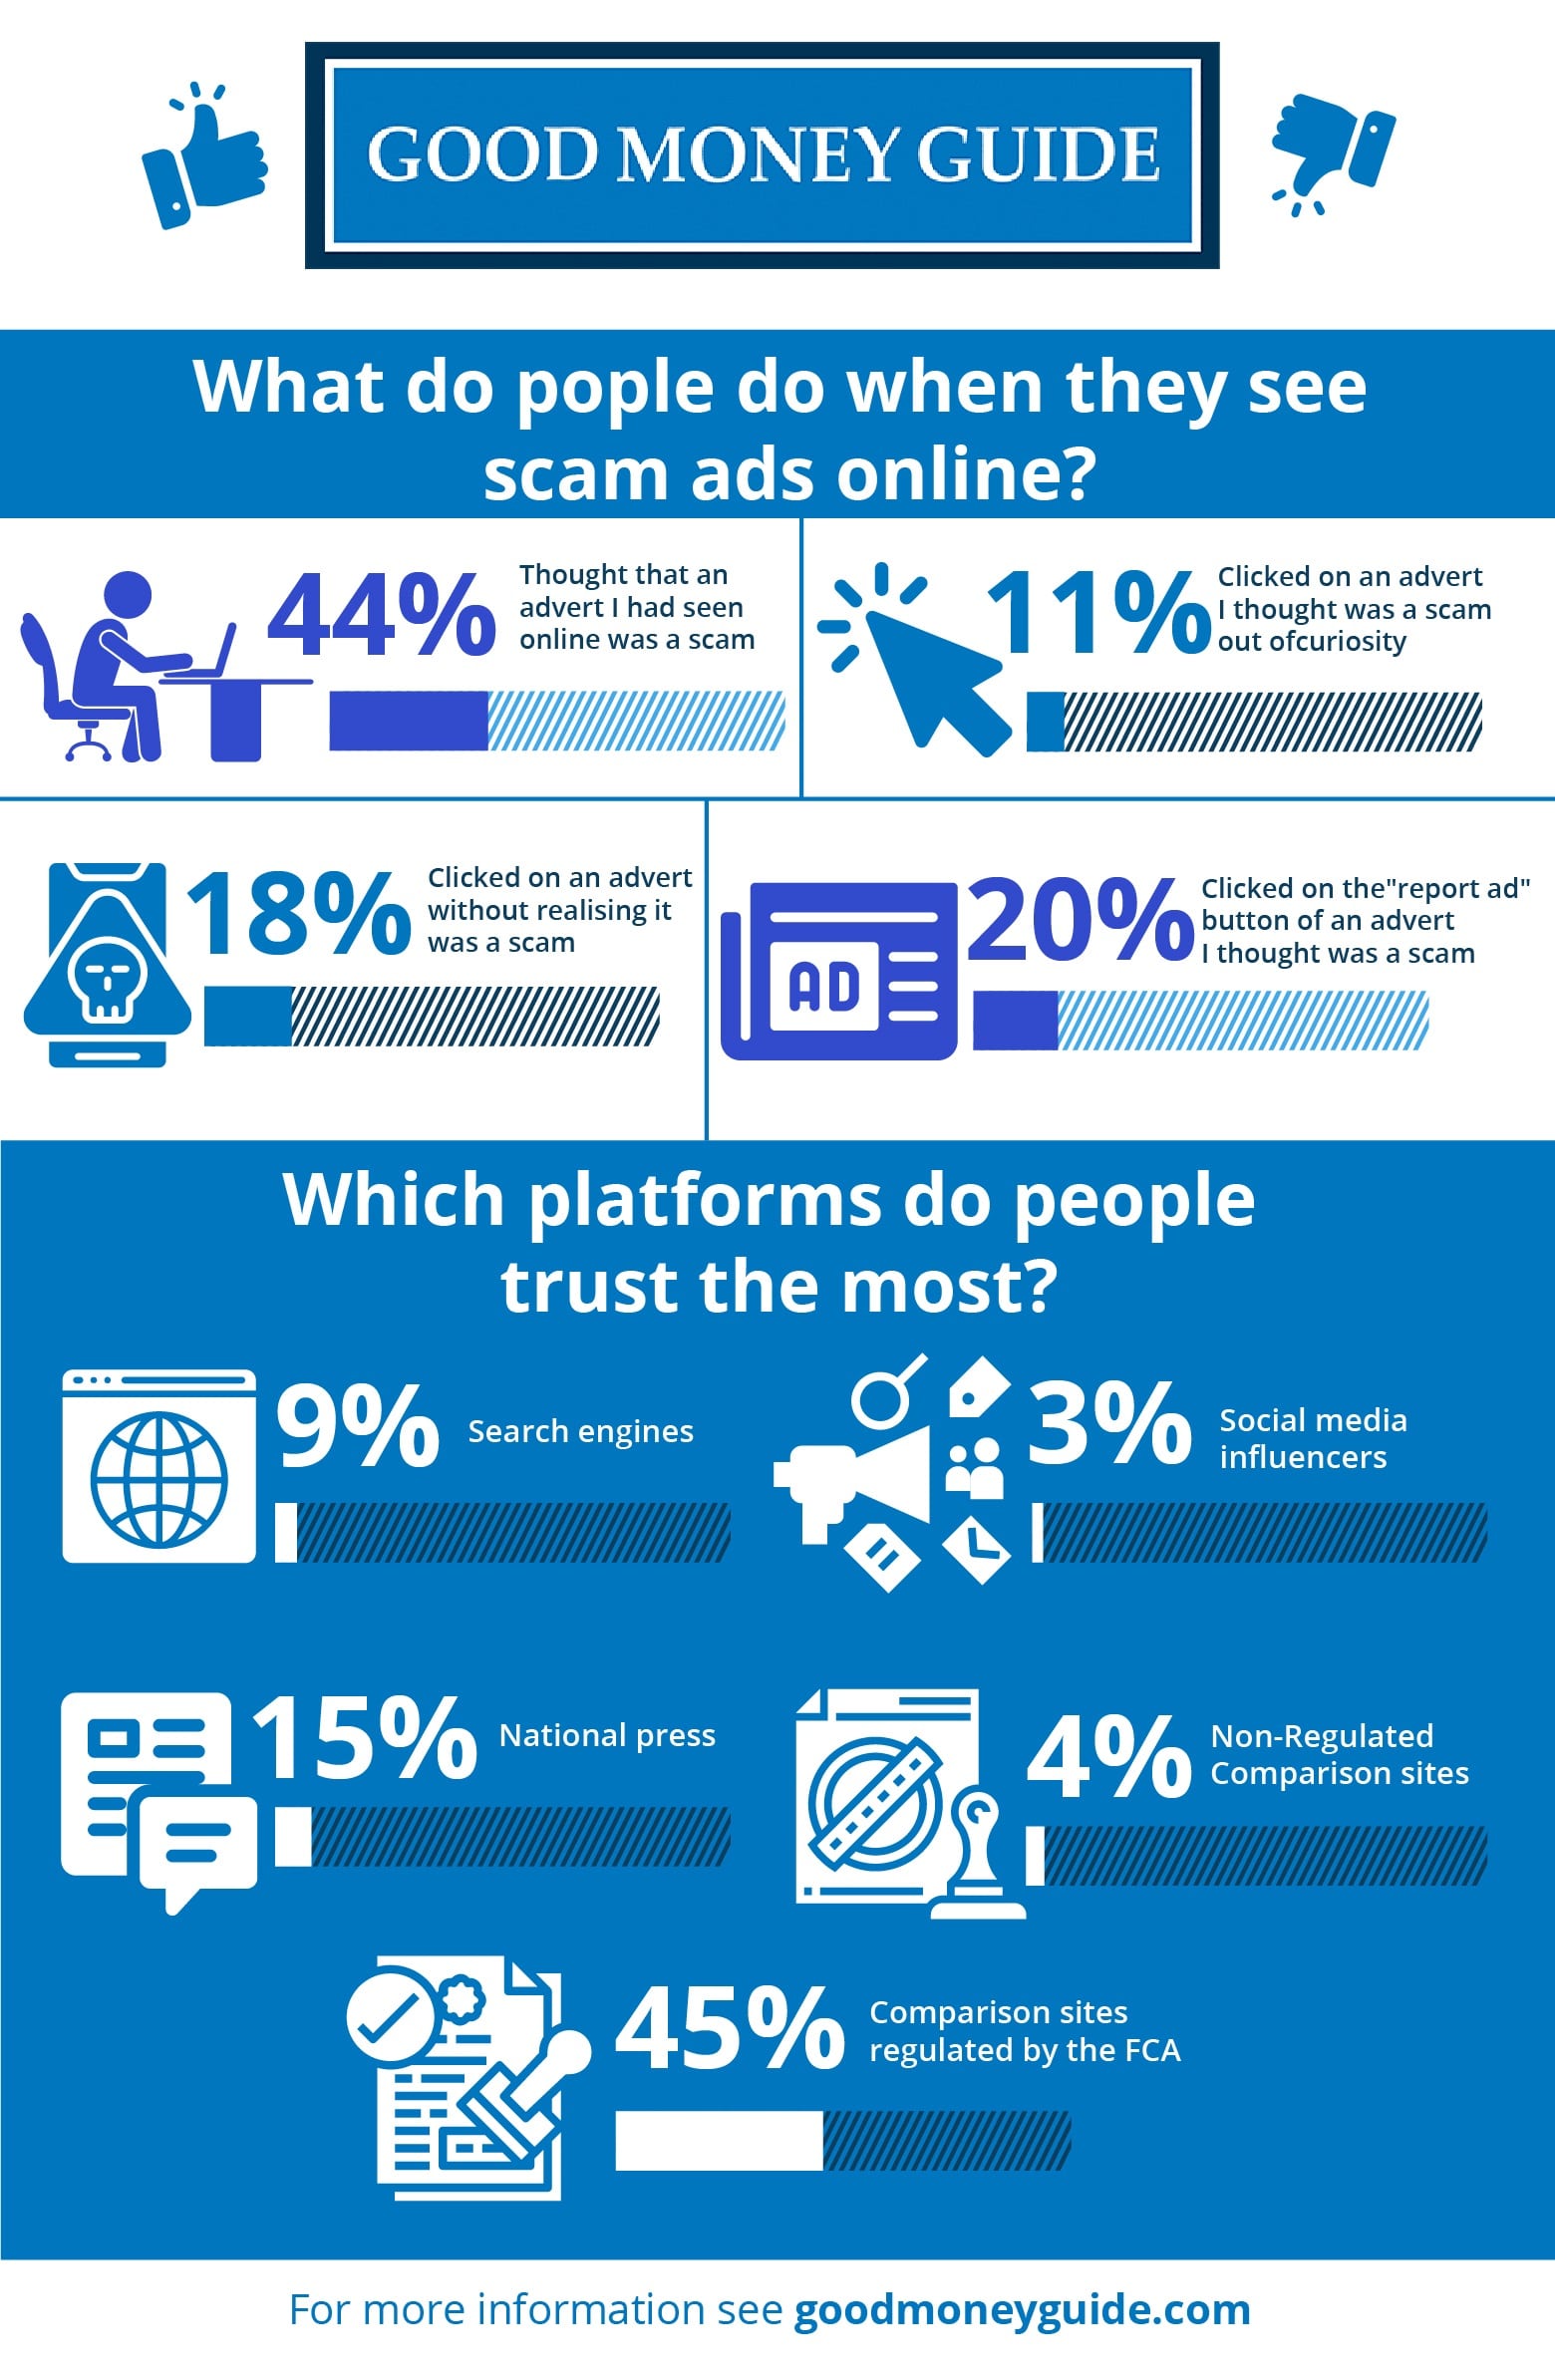 Good Money Guide Financial Promotion Scam Survey Infographic